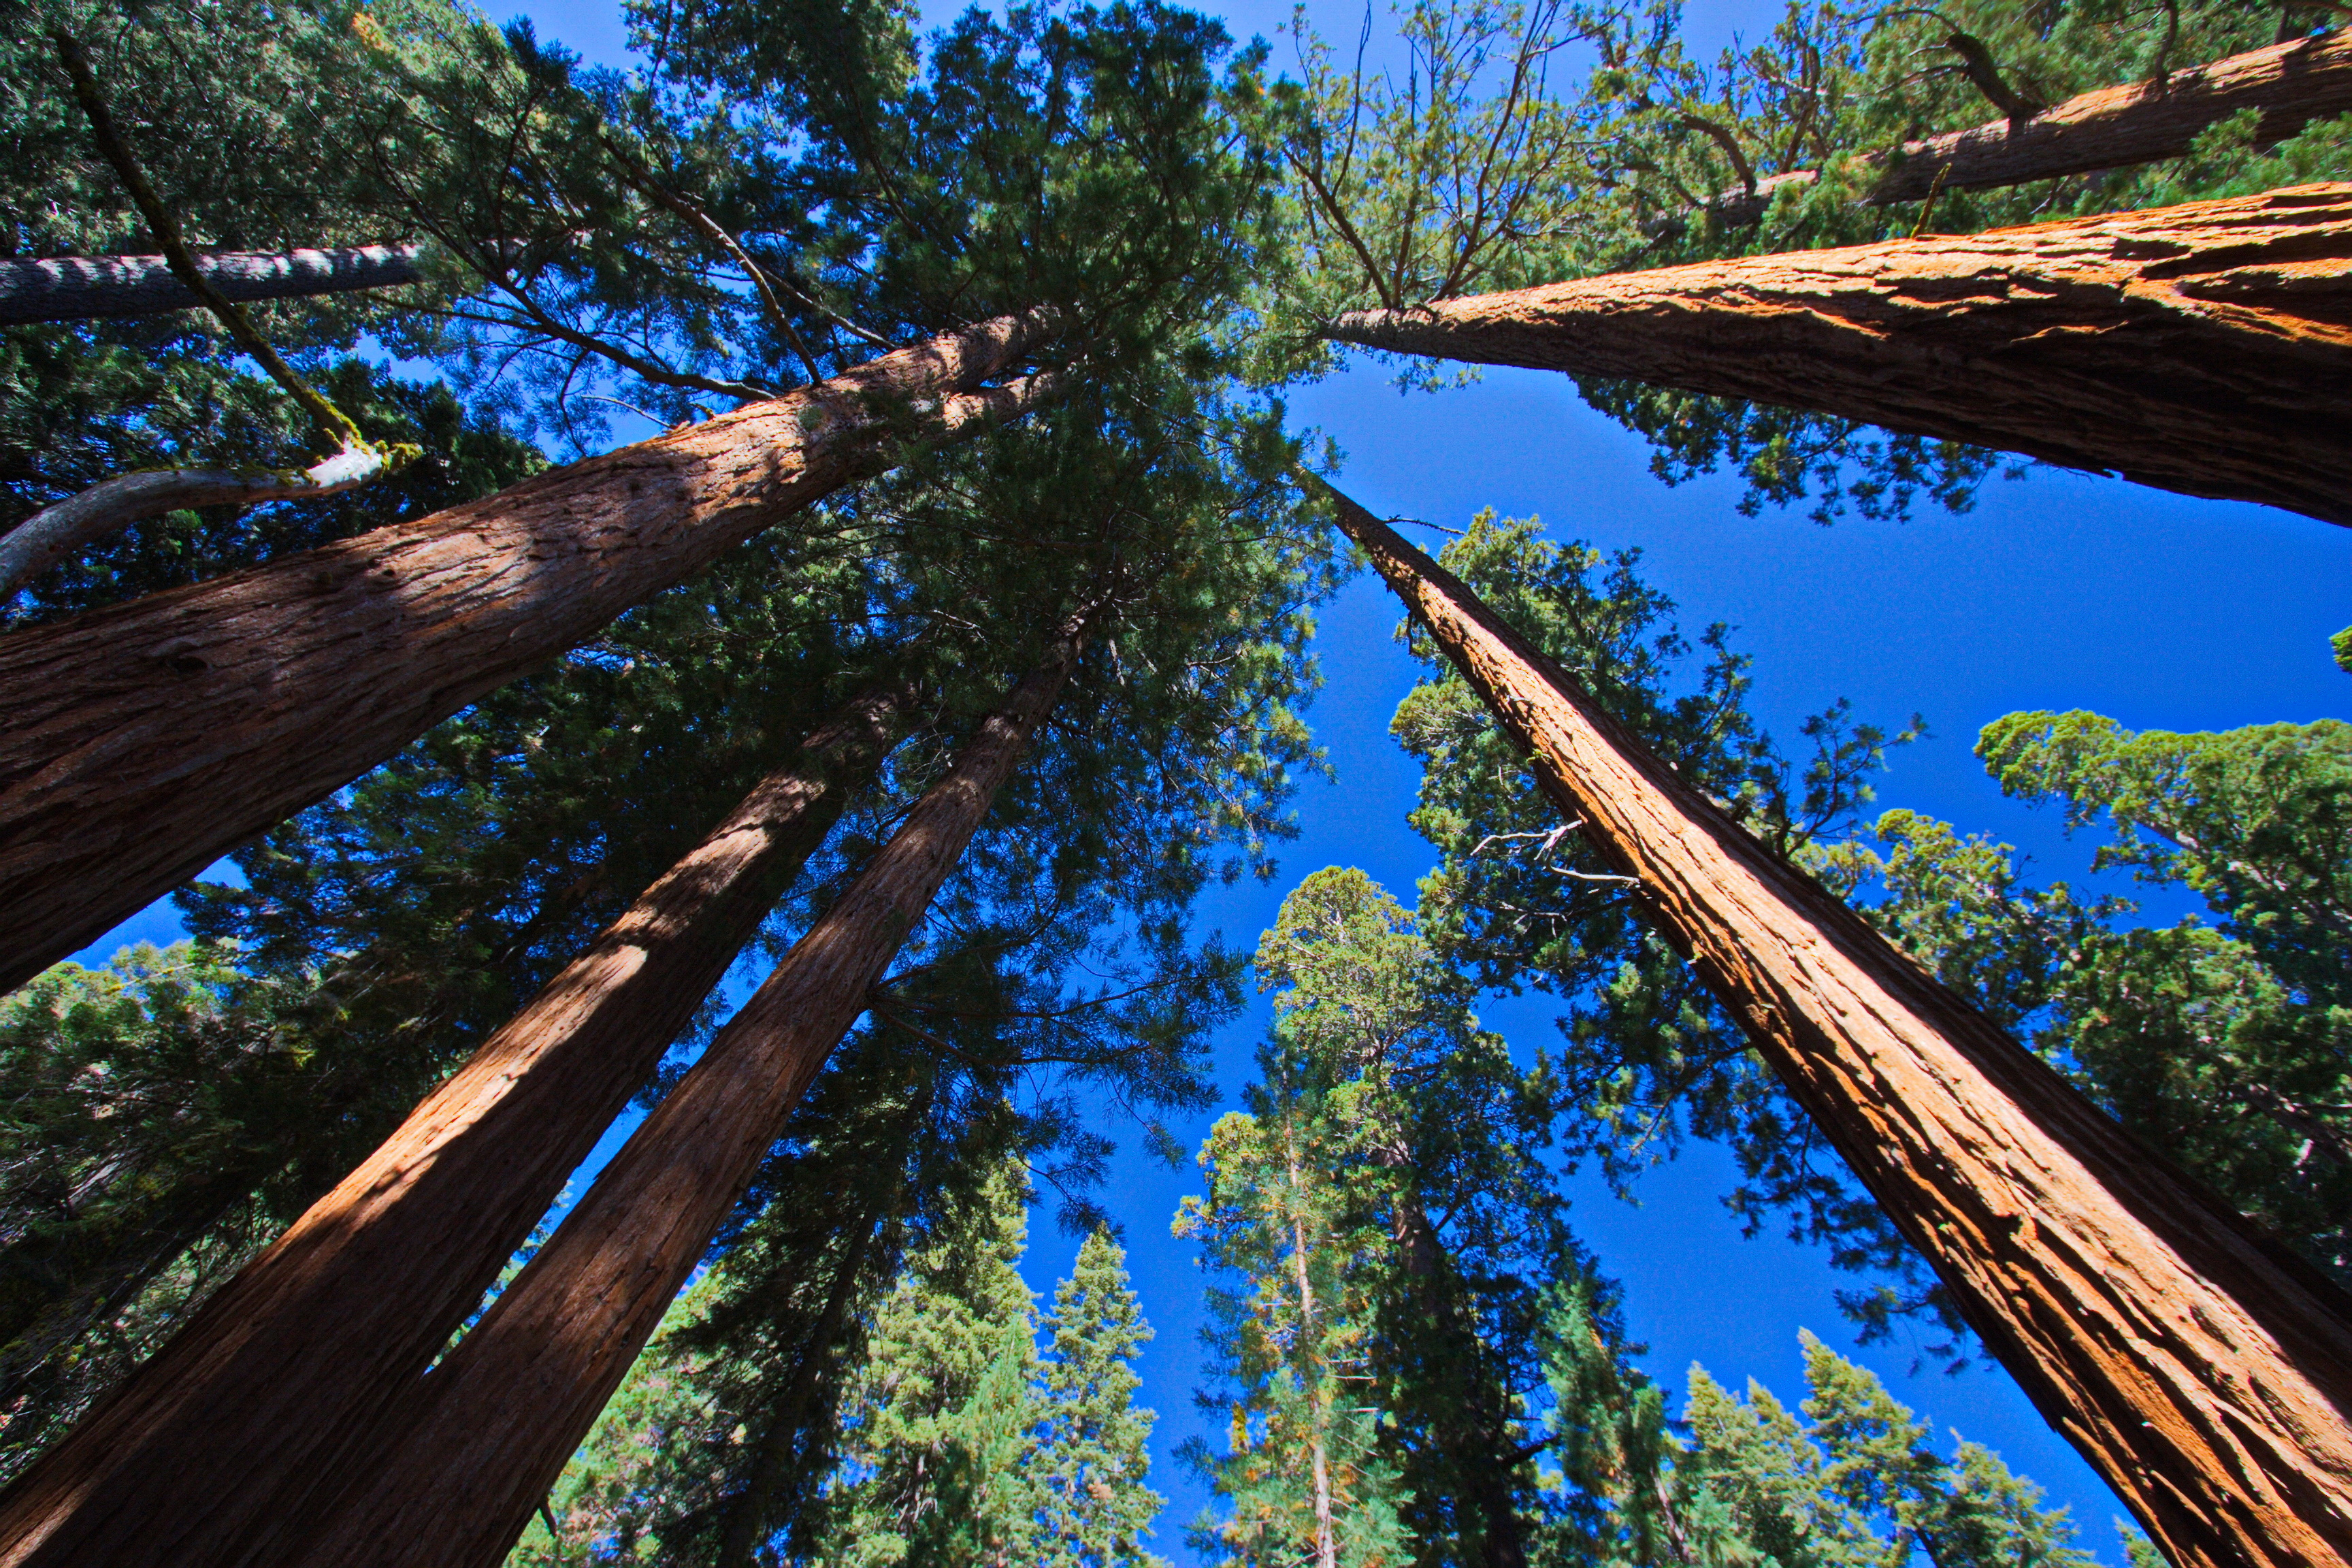 Giant trees in Sequoia NP in California in the USA (Getty Images/iStockphoto)